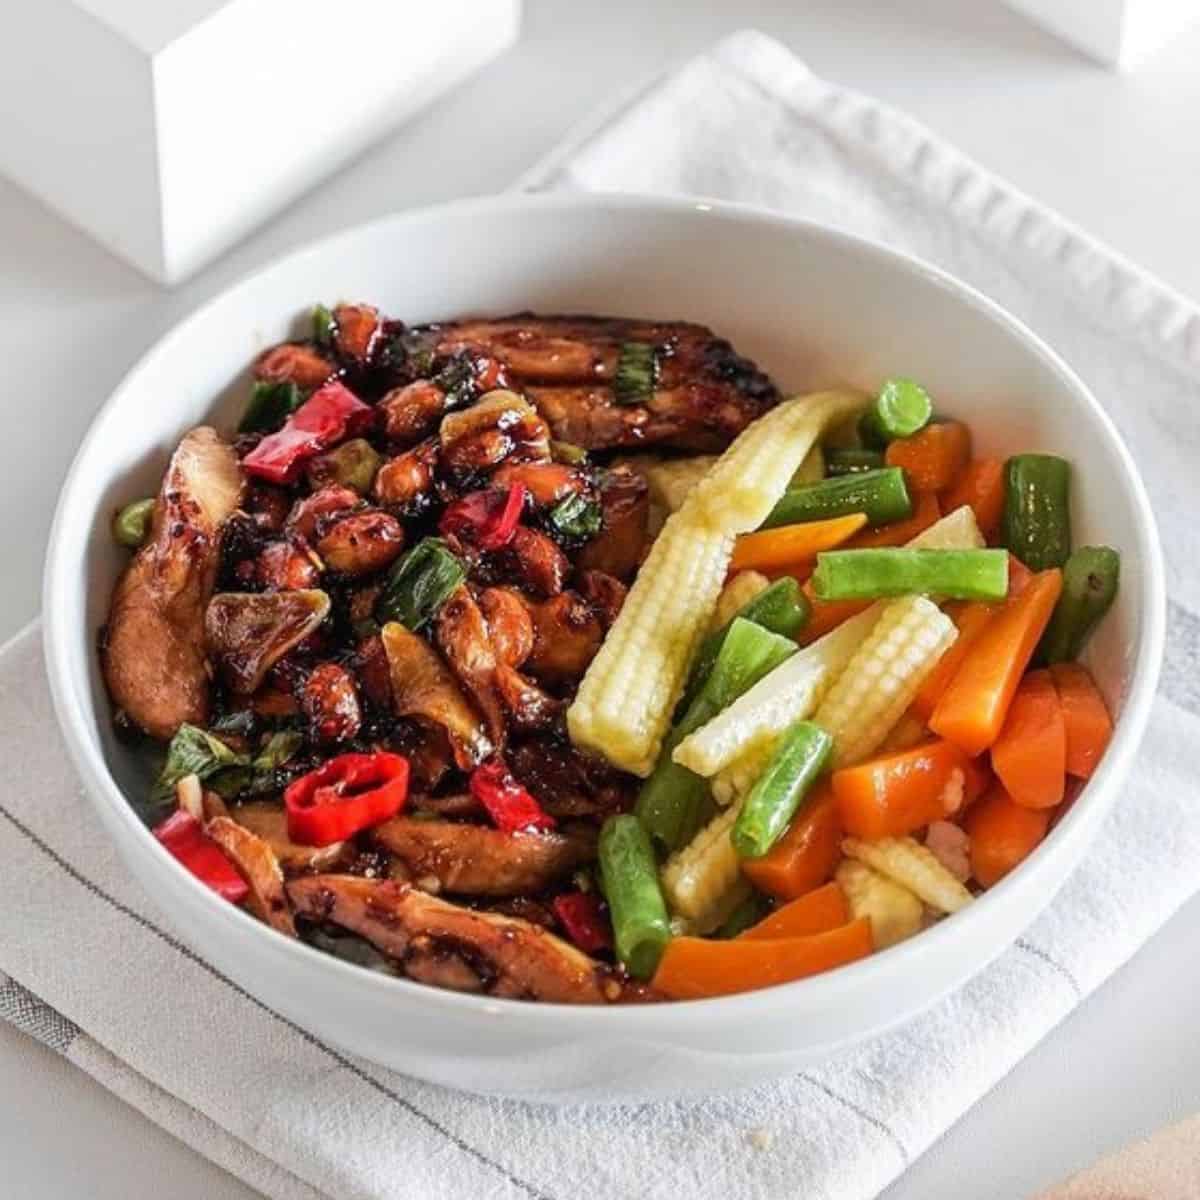 Chinese traditional chicken dish with chillies and veggies